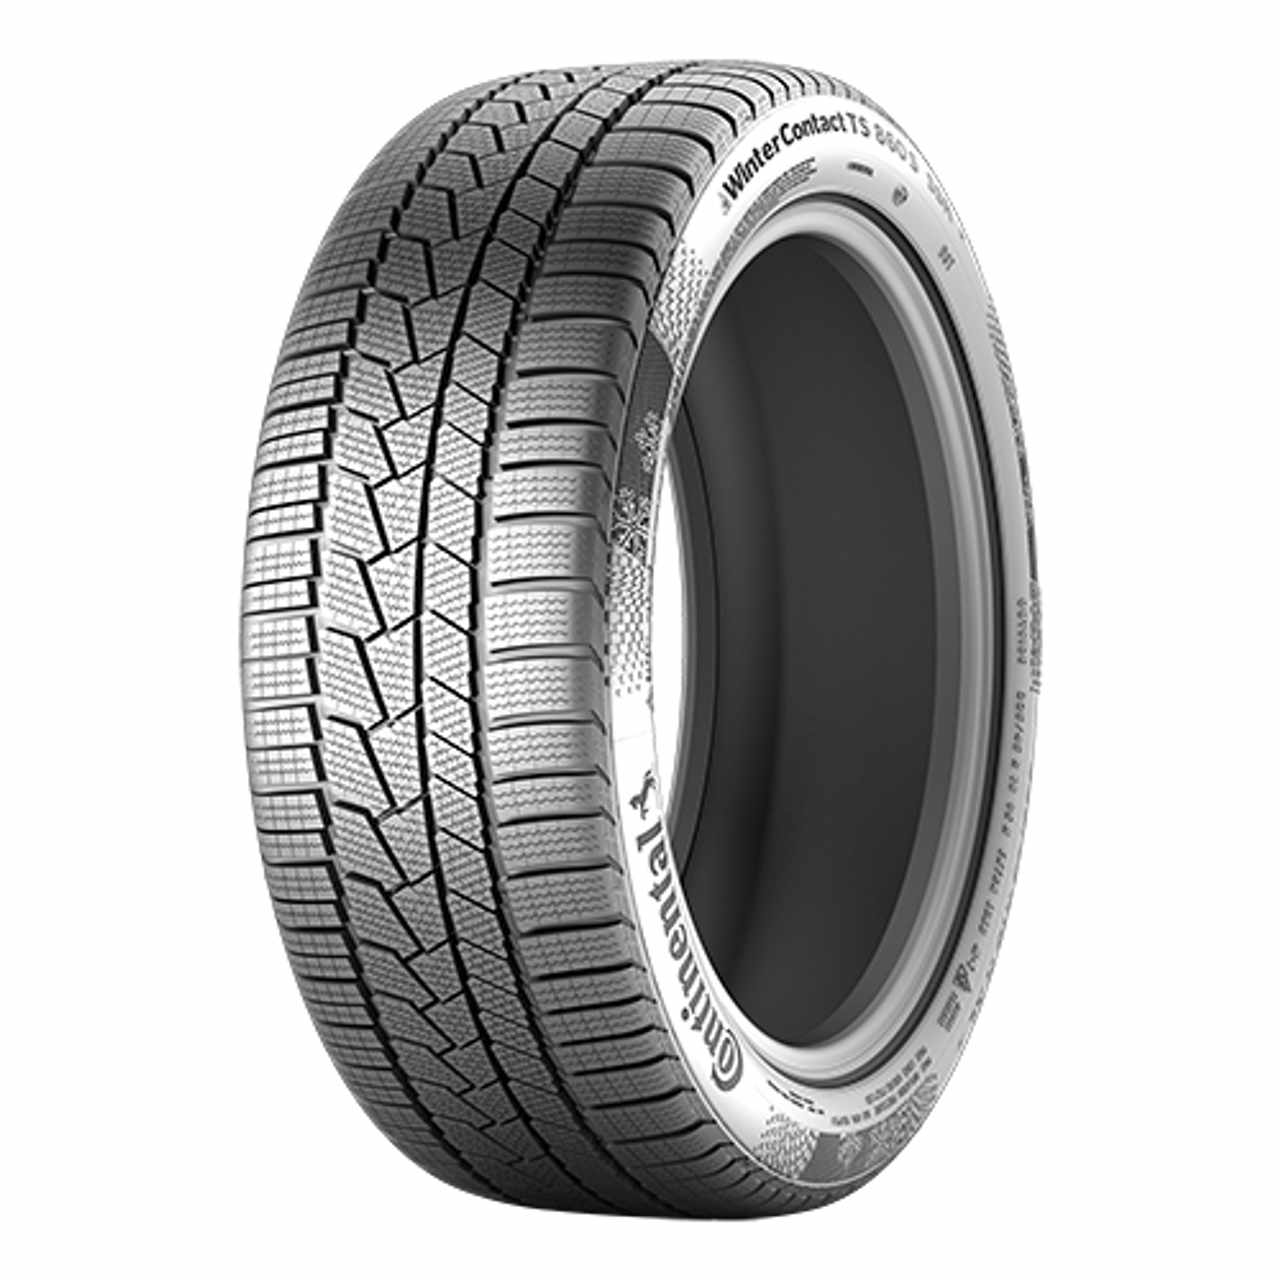 CONTINENTAL WINTERCONTACT TS 860 S (*) (MO) (EVc) 275/40R19 105H BSW von Continental